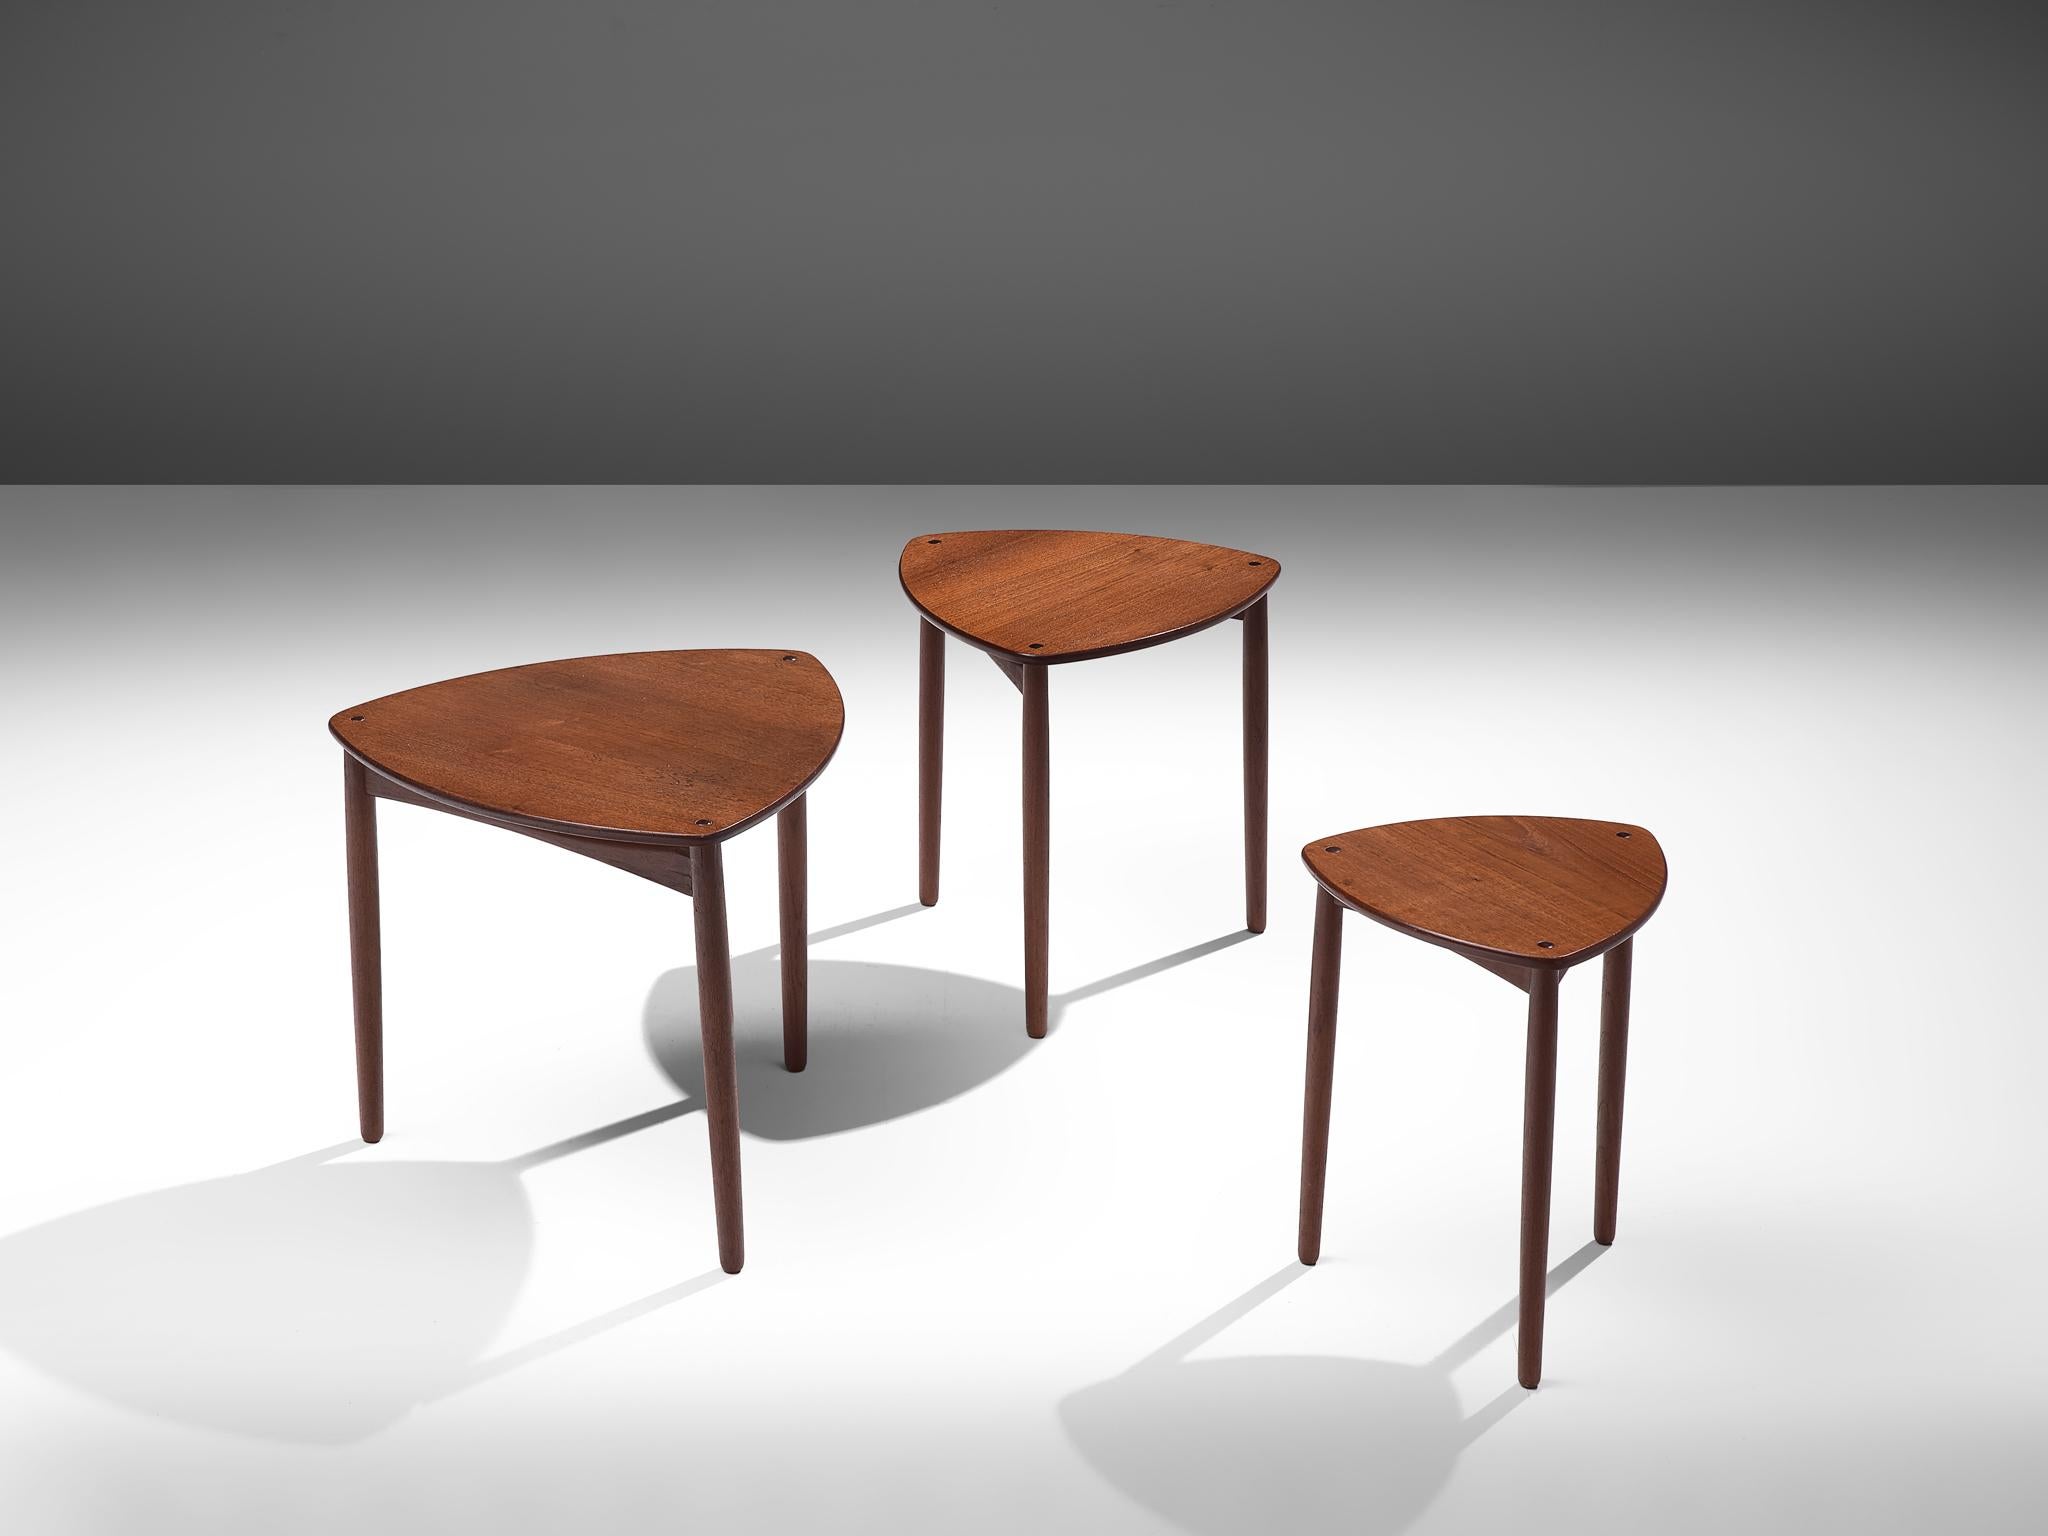 Ejner Larsen and Aksel Bender Madsen for Willy Beck, set of three nesting tables, teak, Denmark, 1950s.

Elegant set of three nesting tables by the Danish designer duo Ejner Larsen and Aksel Bender Madsen. Each tables has a triangular shaped top